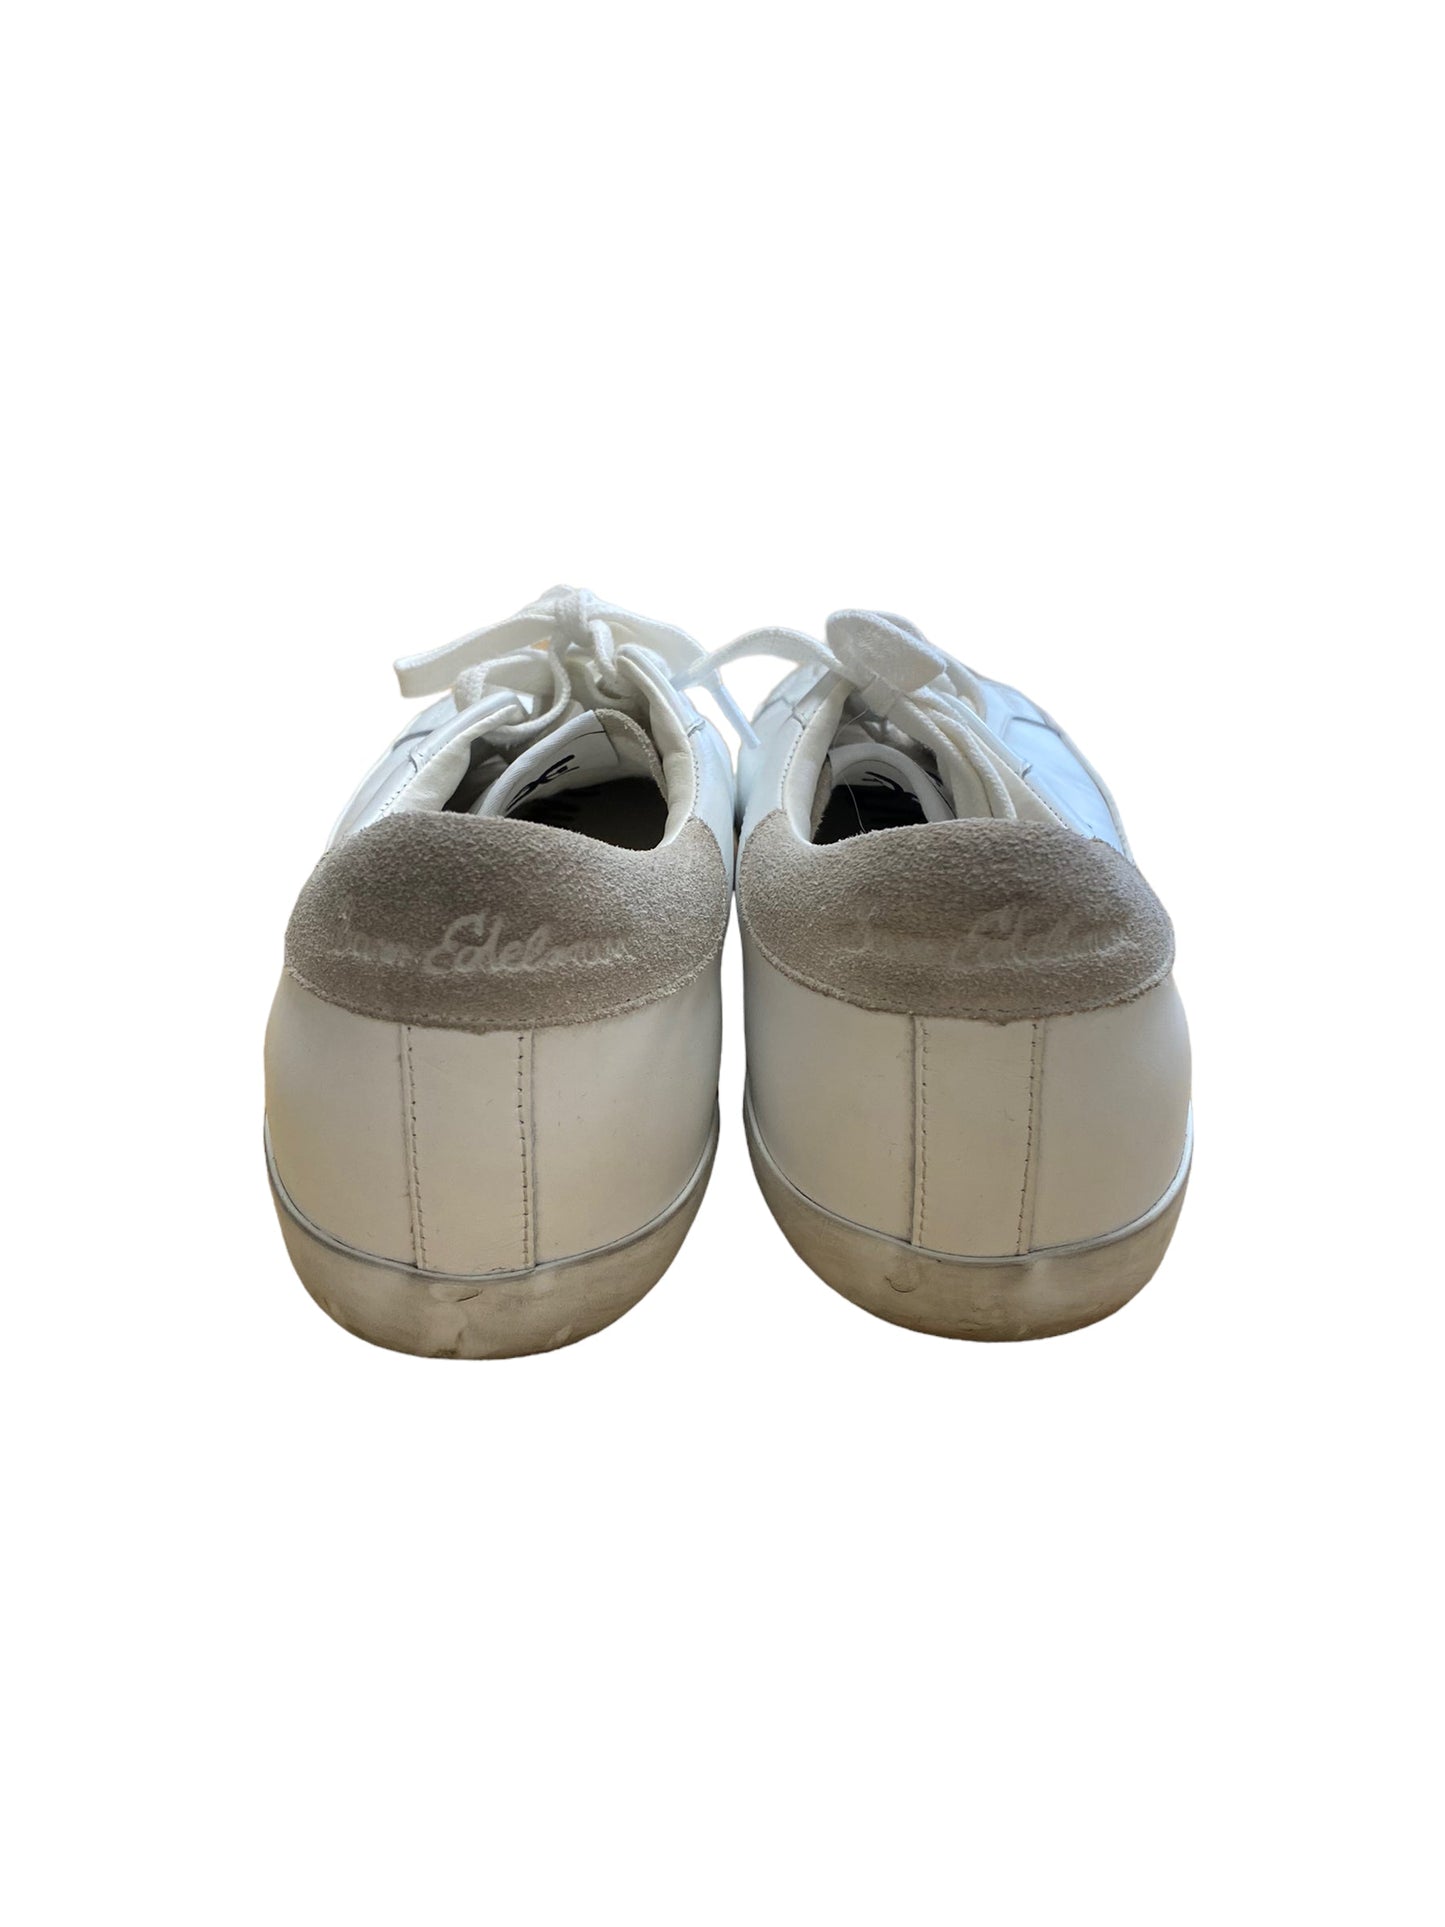 Shoes Sneakers By Sam Edelman  Size: 9.5